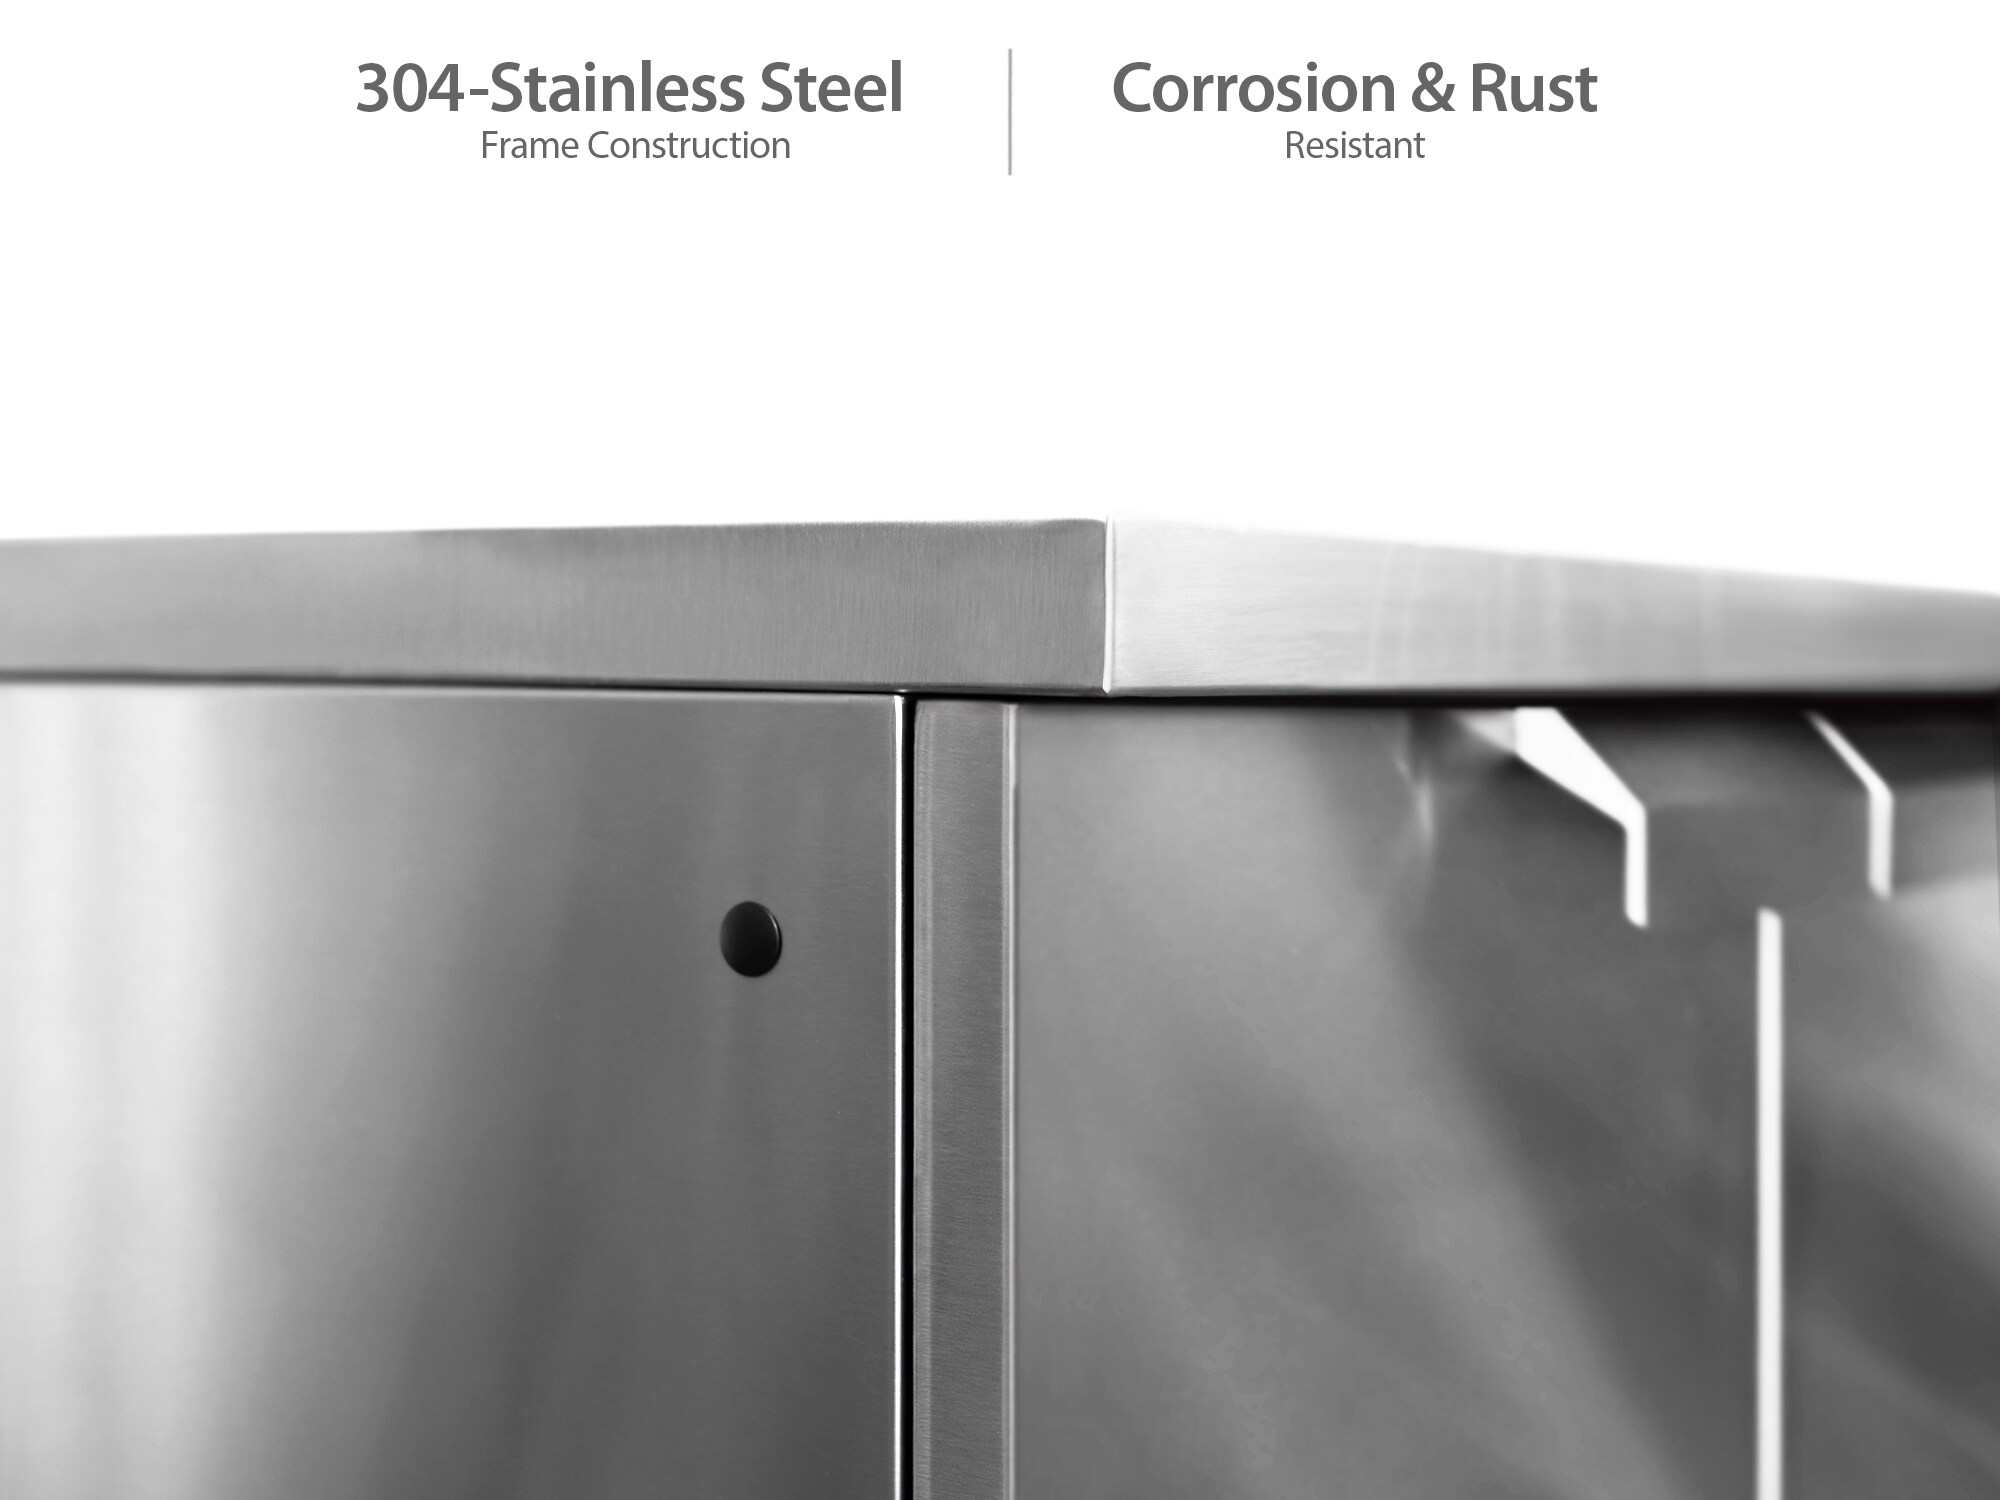 84 by 1.25 by 24 NewAge Products Performance Plus Series Stainless Steel Work Top Cabinet 